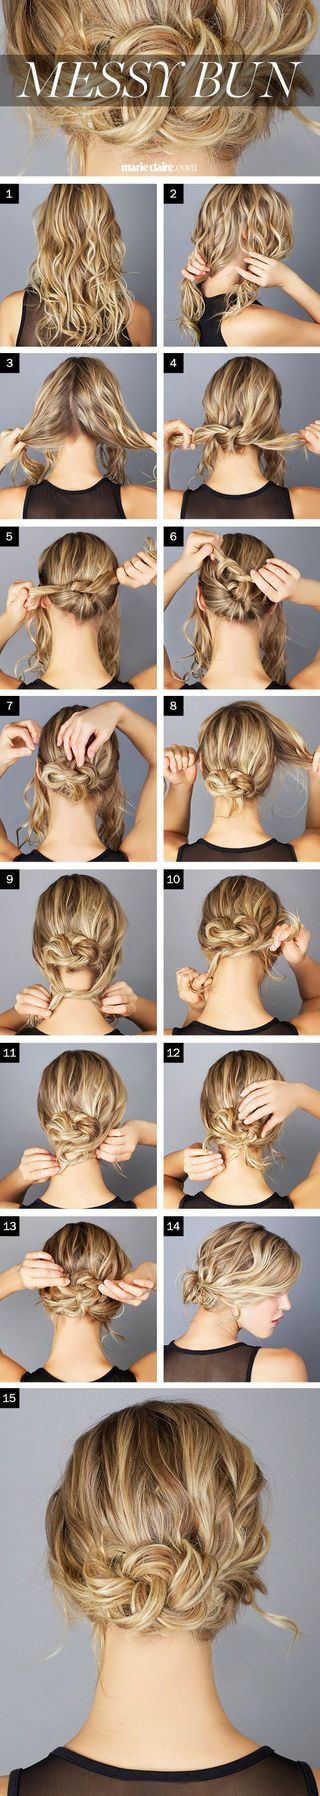 Hair How-To: The Messy Bun